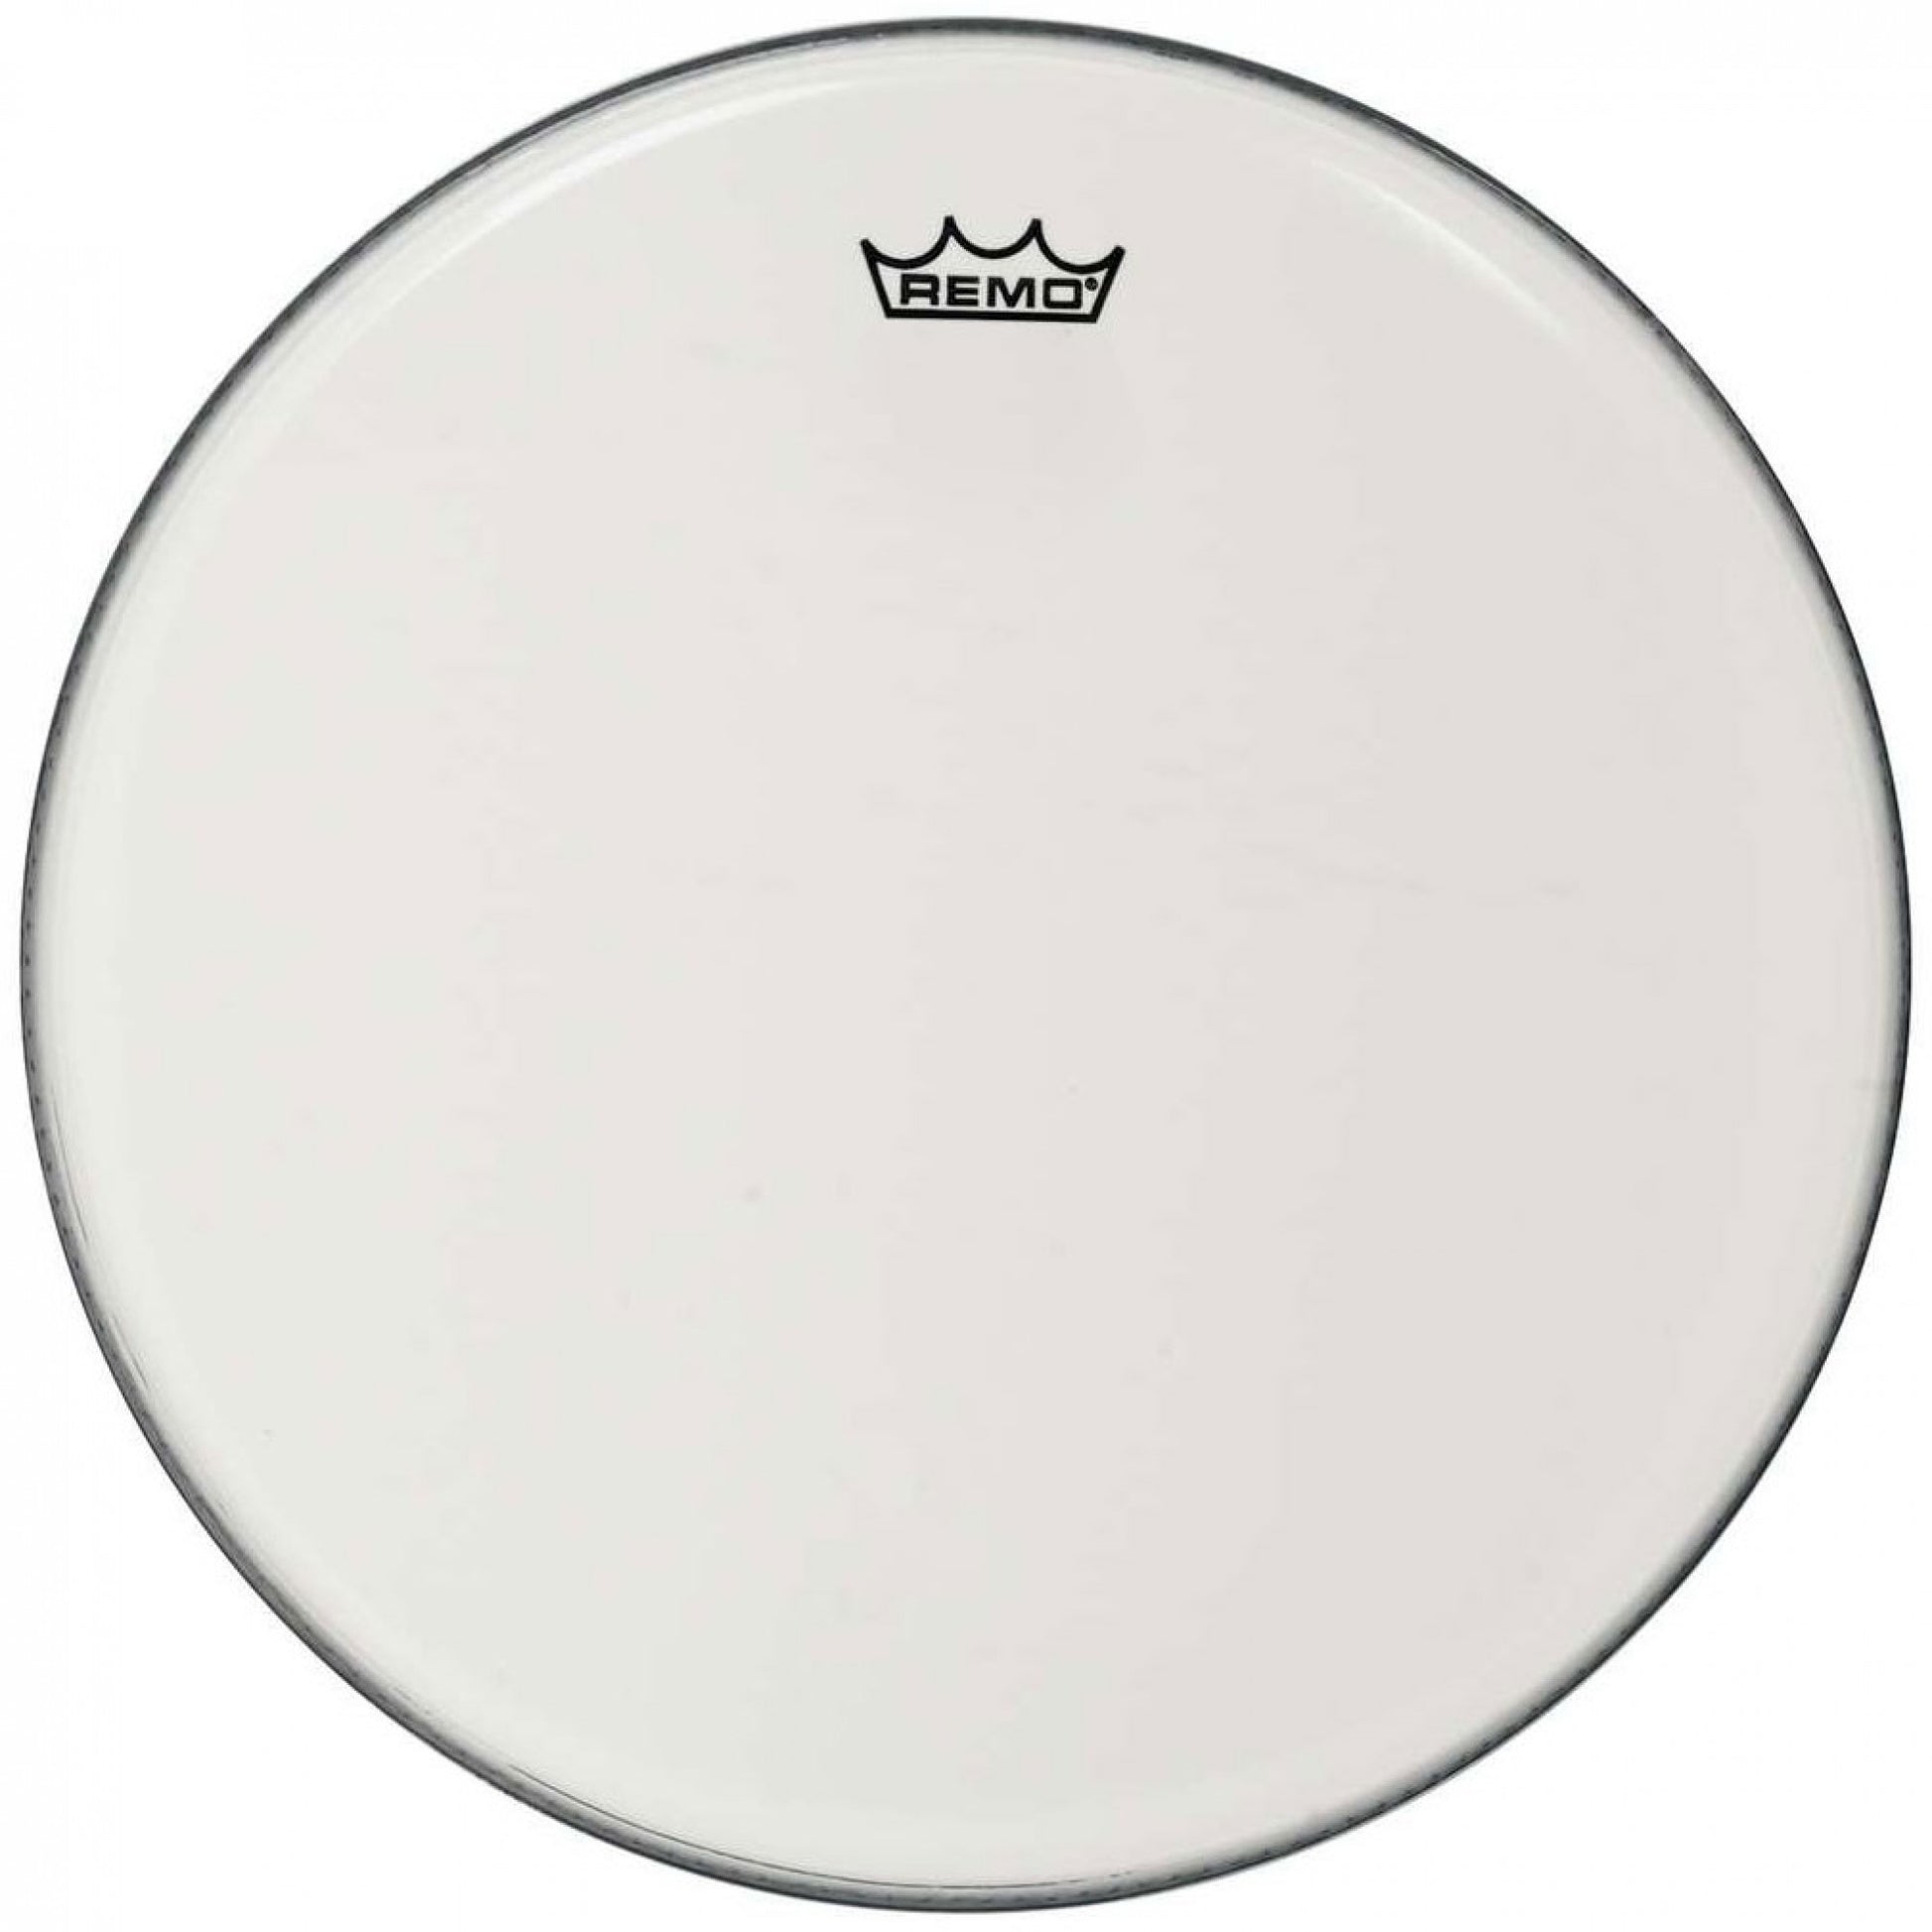 REMO | Emperor | 13" Clear Drum Head | Drum Skin | BE-0313-00 | Piano Time | South Melbourne